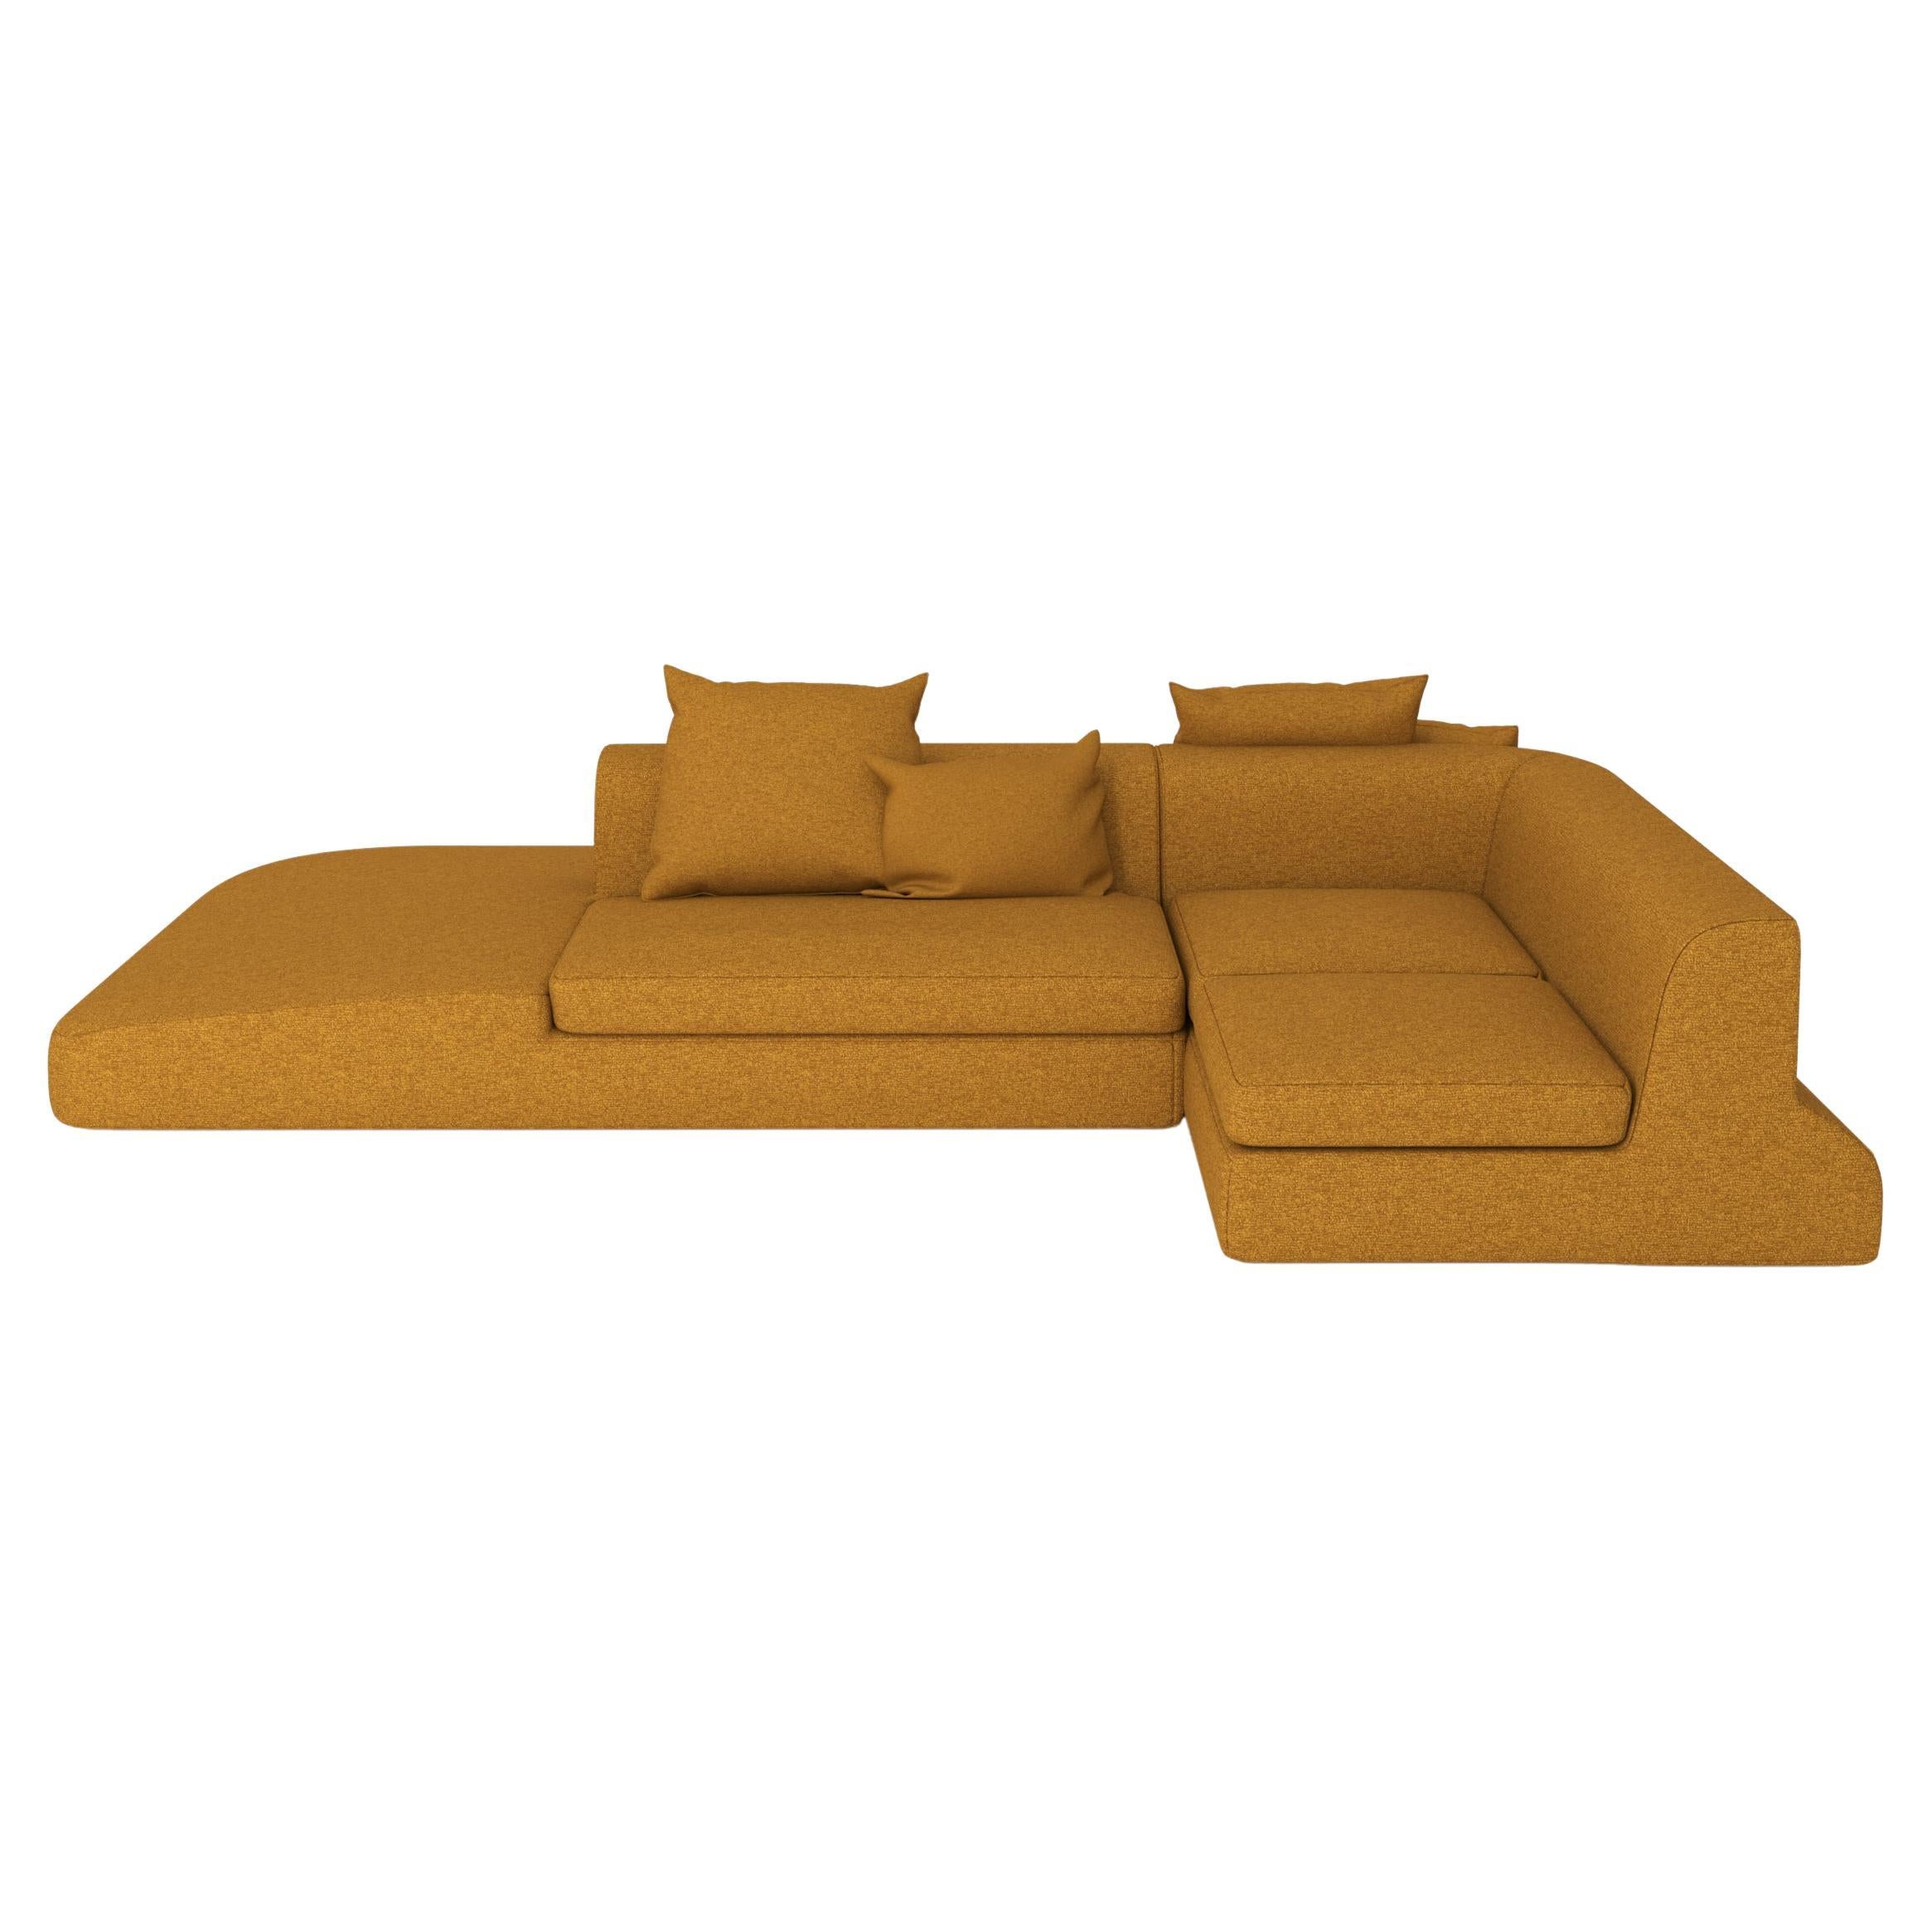 Yellow Ochre Modular Sofa Slope by Andrea Steidl for Delvis Unlimited